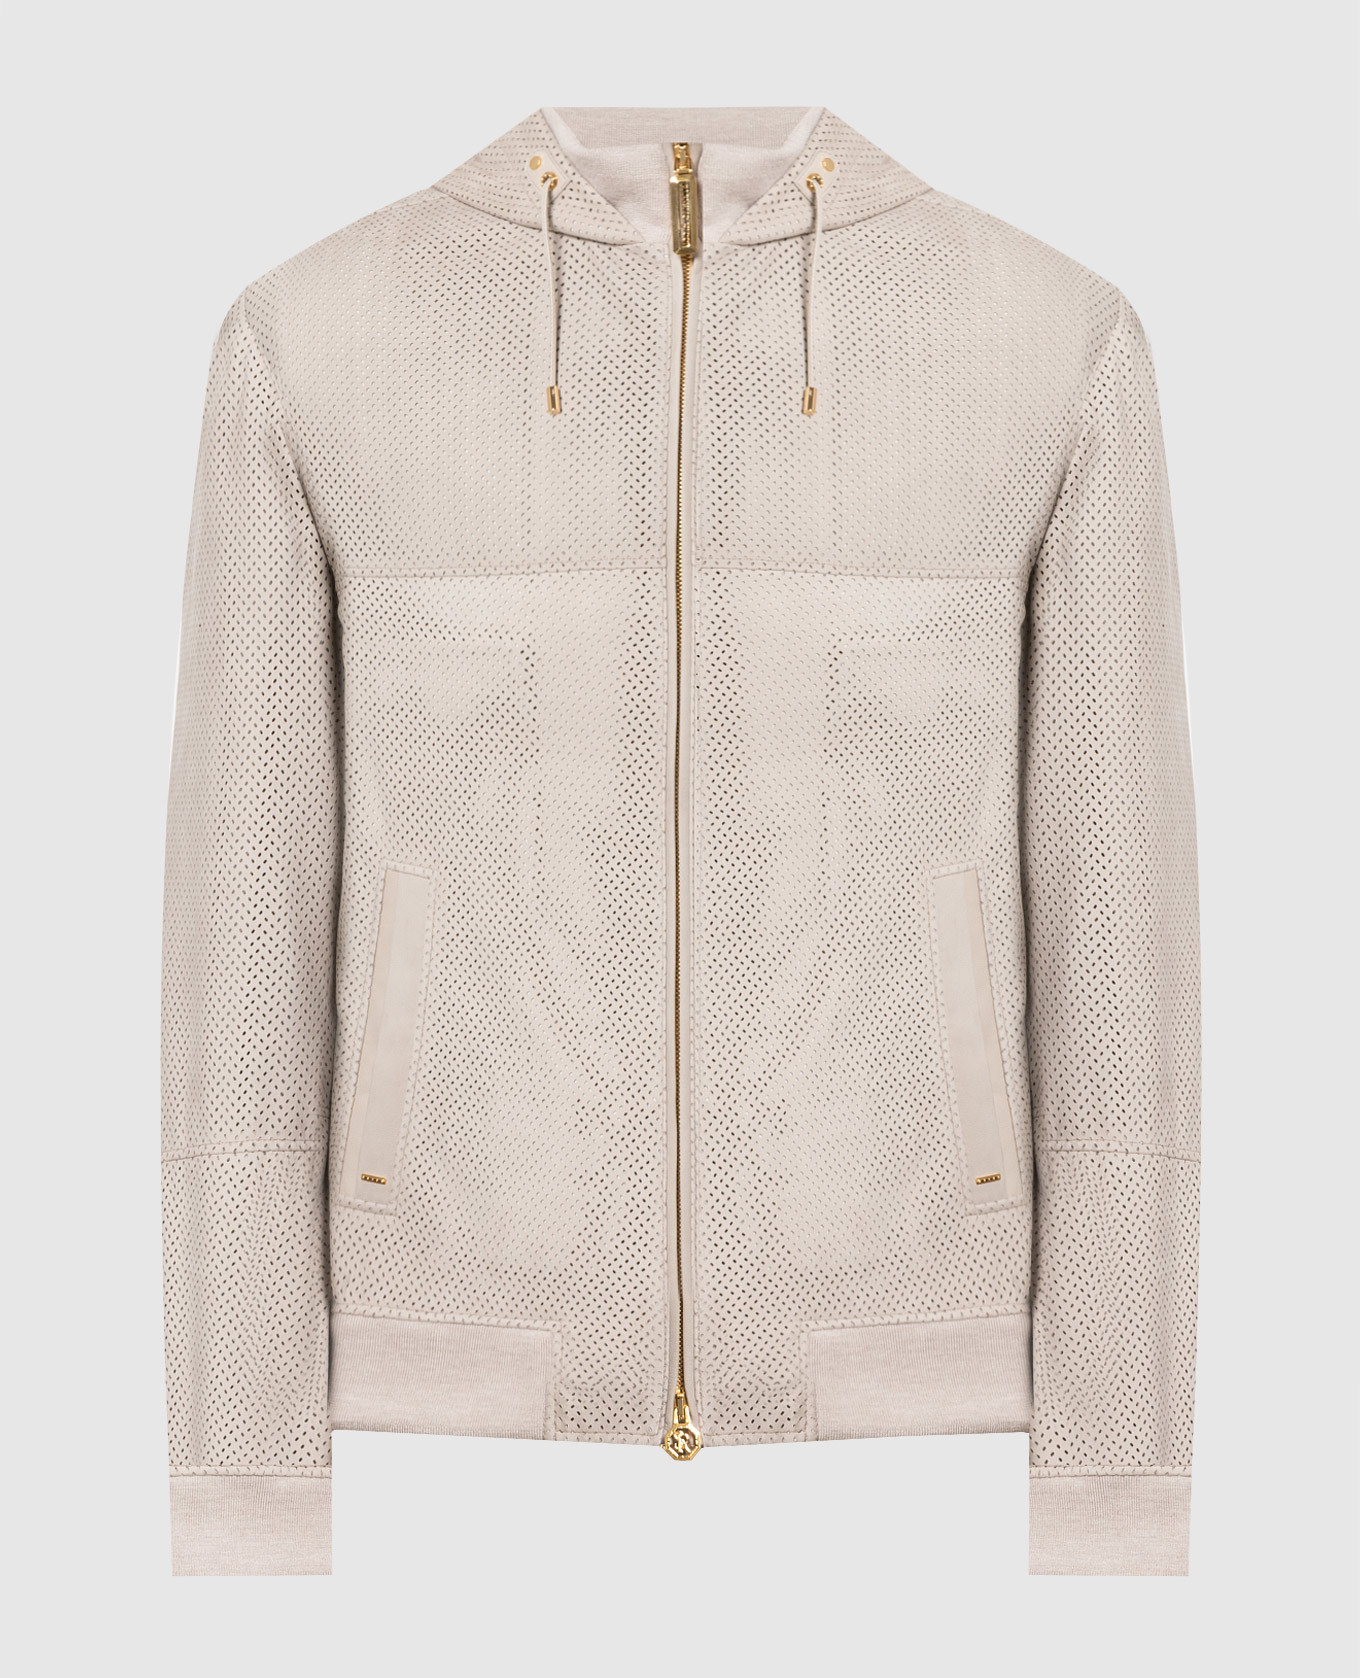 Stefano Ricci - Beige leather jacket with perforation